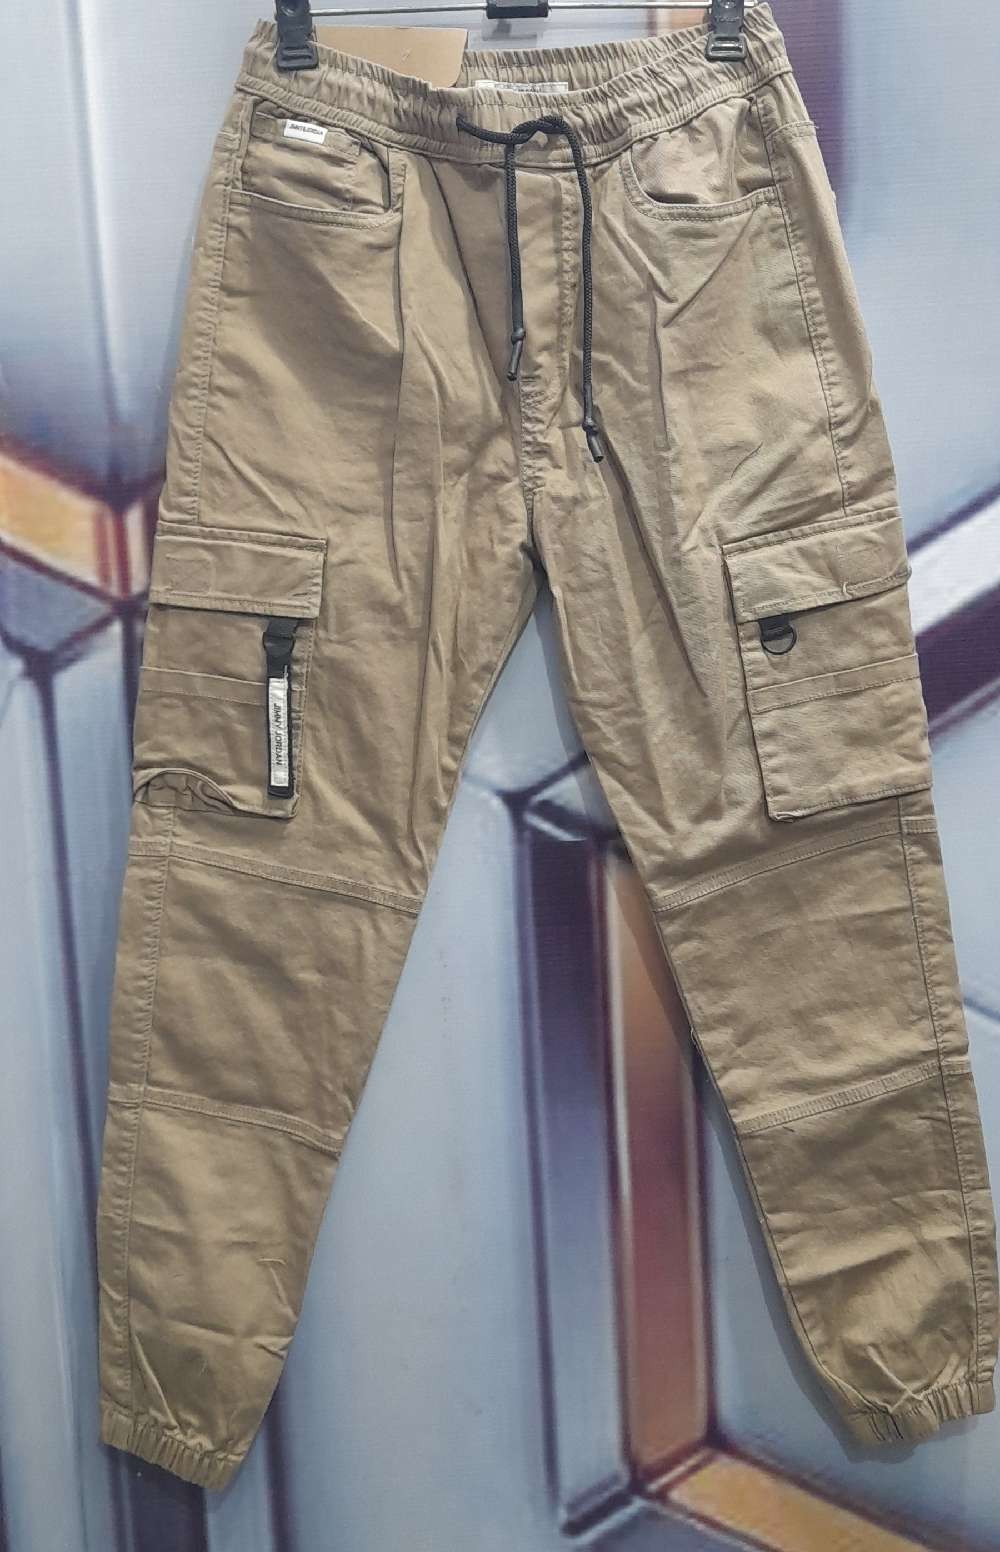 Jimmy jorden jogger pant mens wear size  30 to 36 available